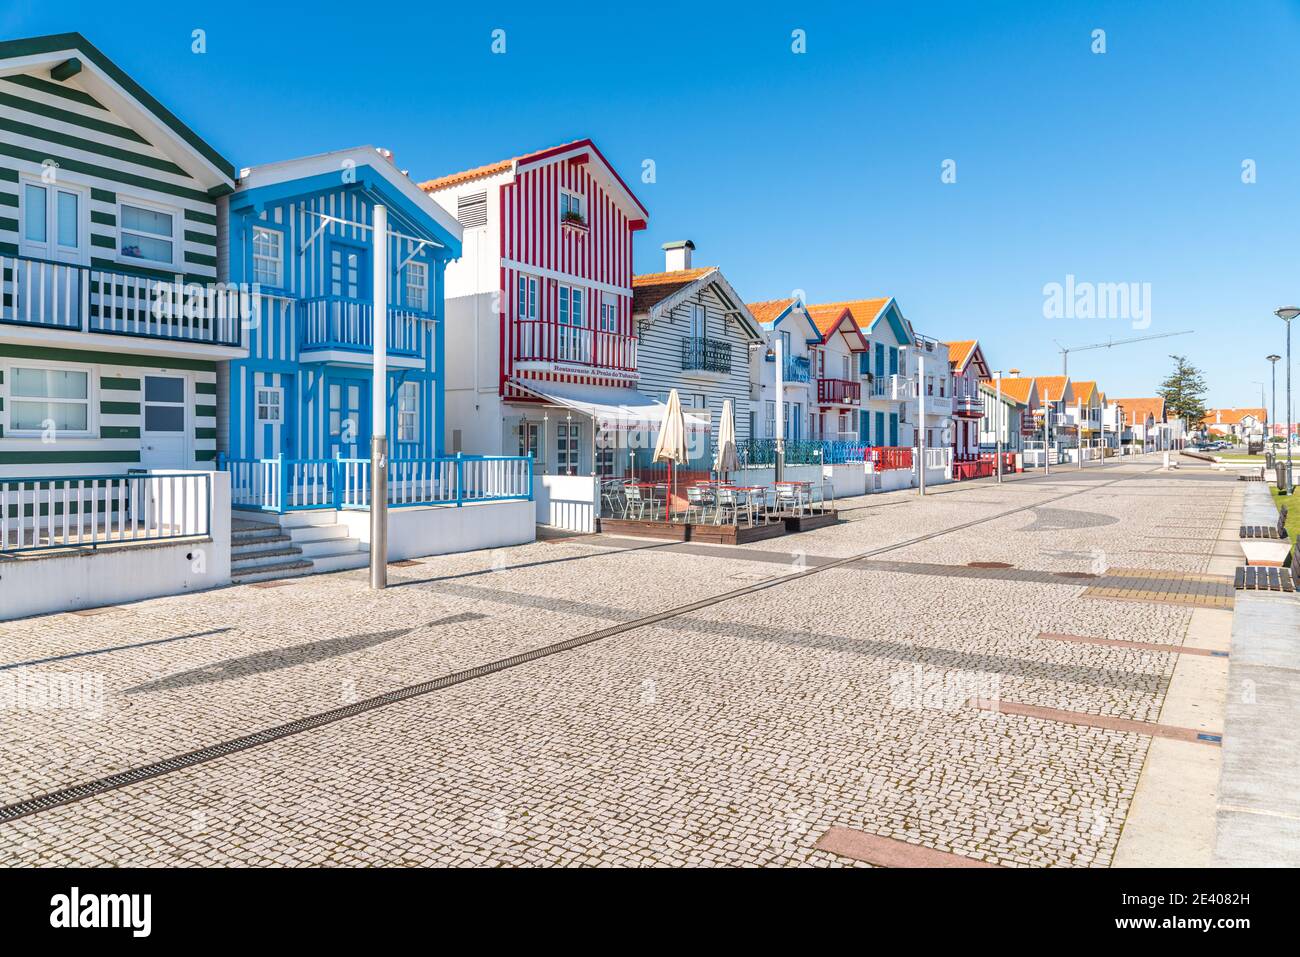 colorful image Typical stripes Houses in Costa Nova, Aveiro, Barra, Portugal Stock Photo